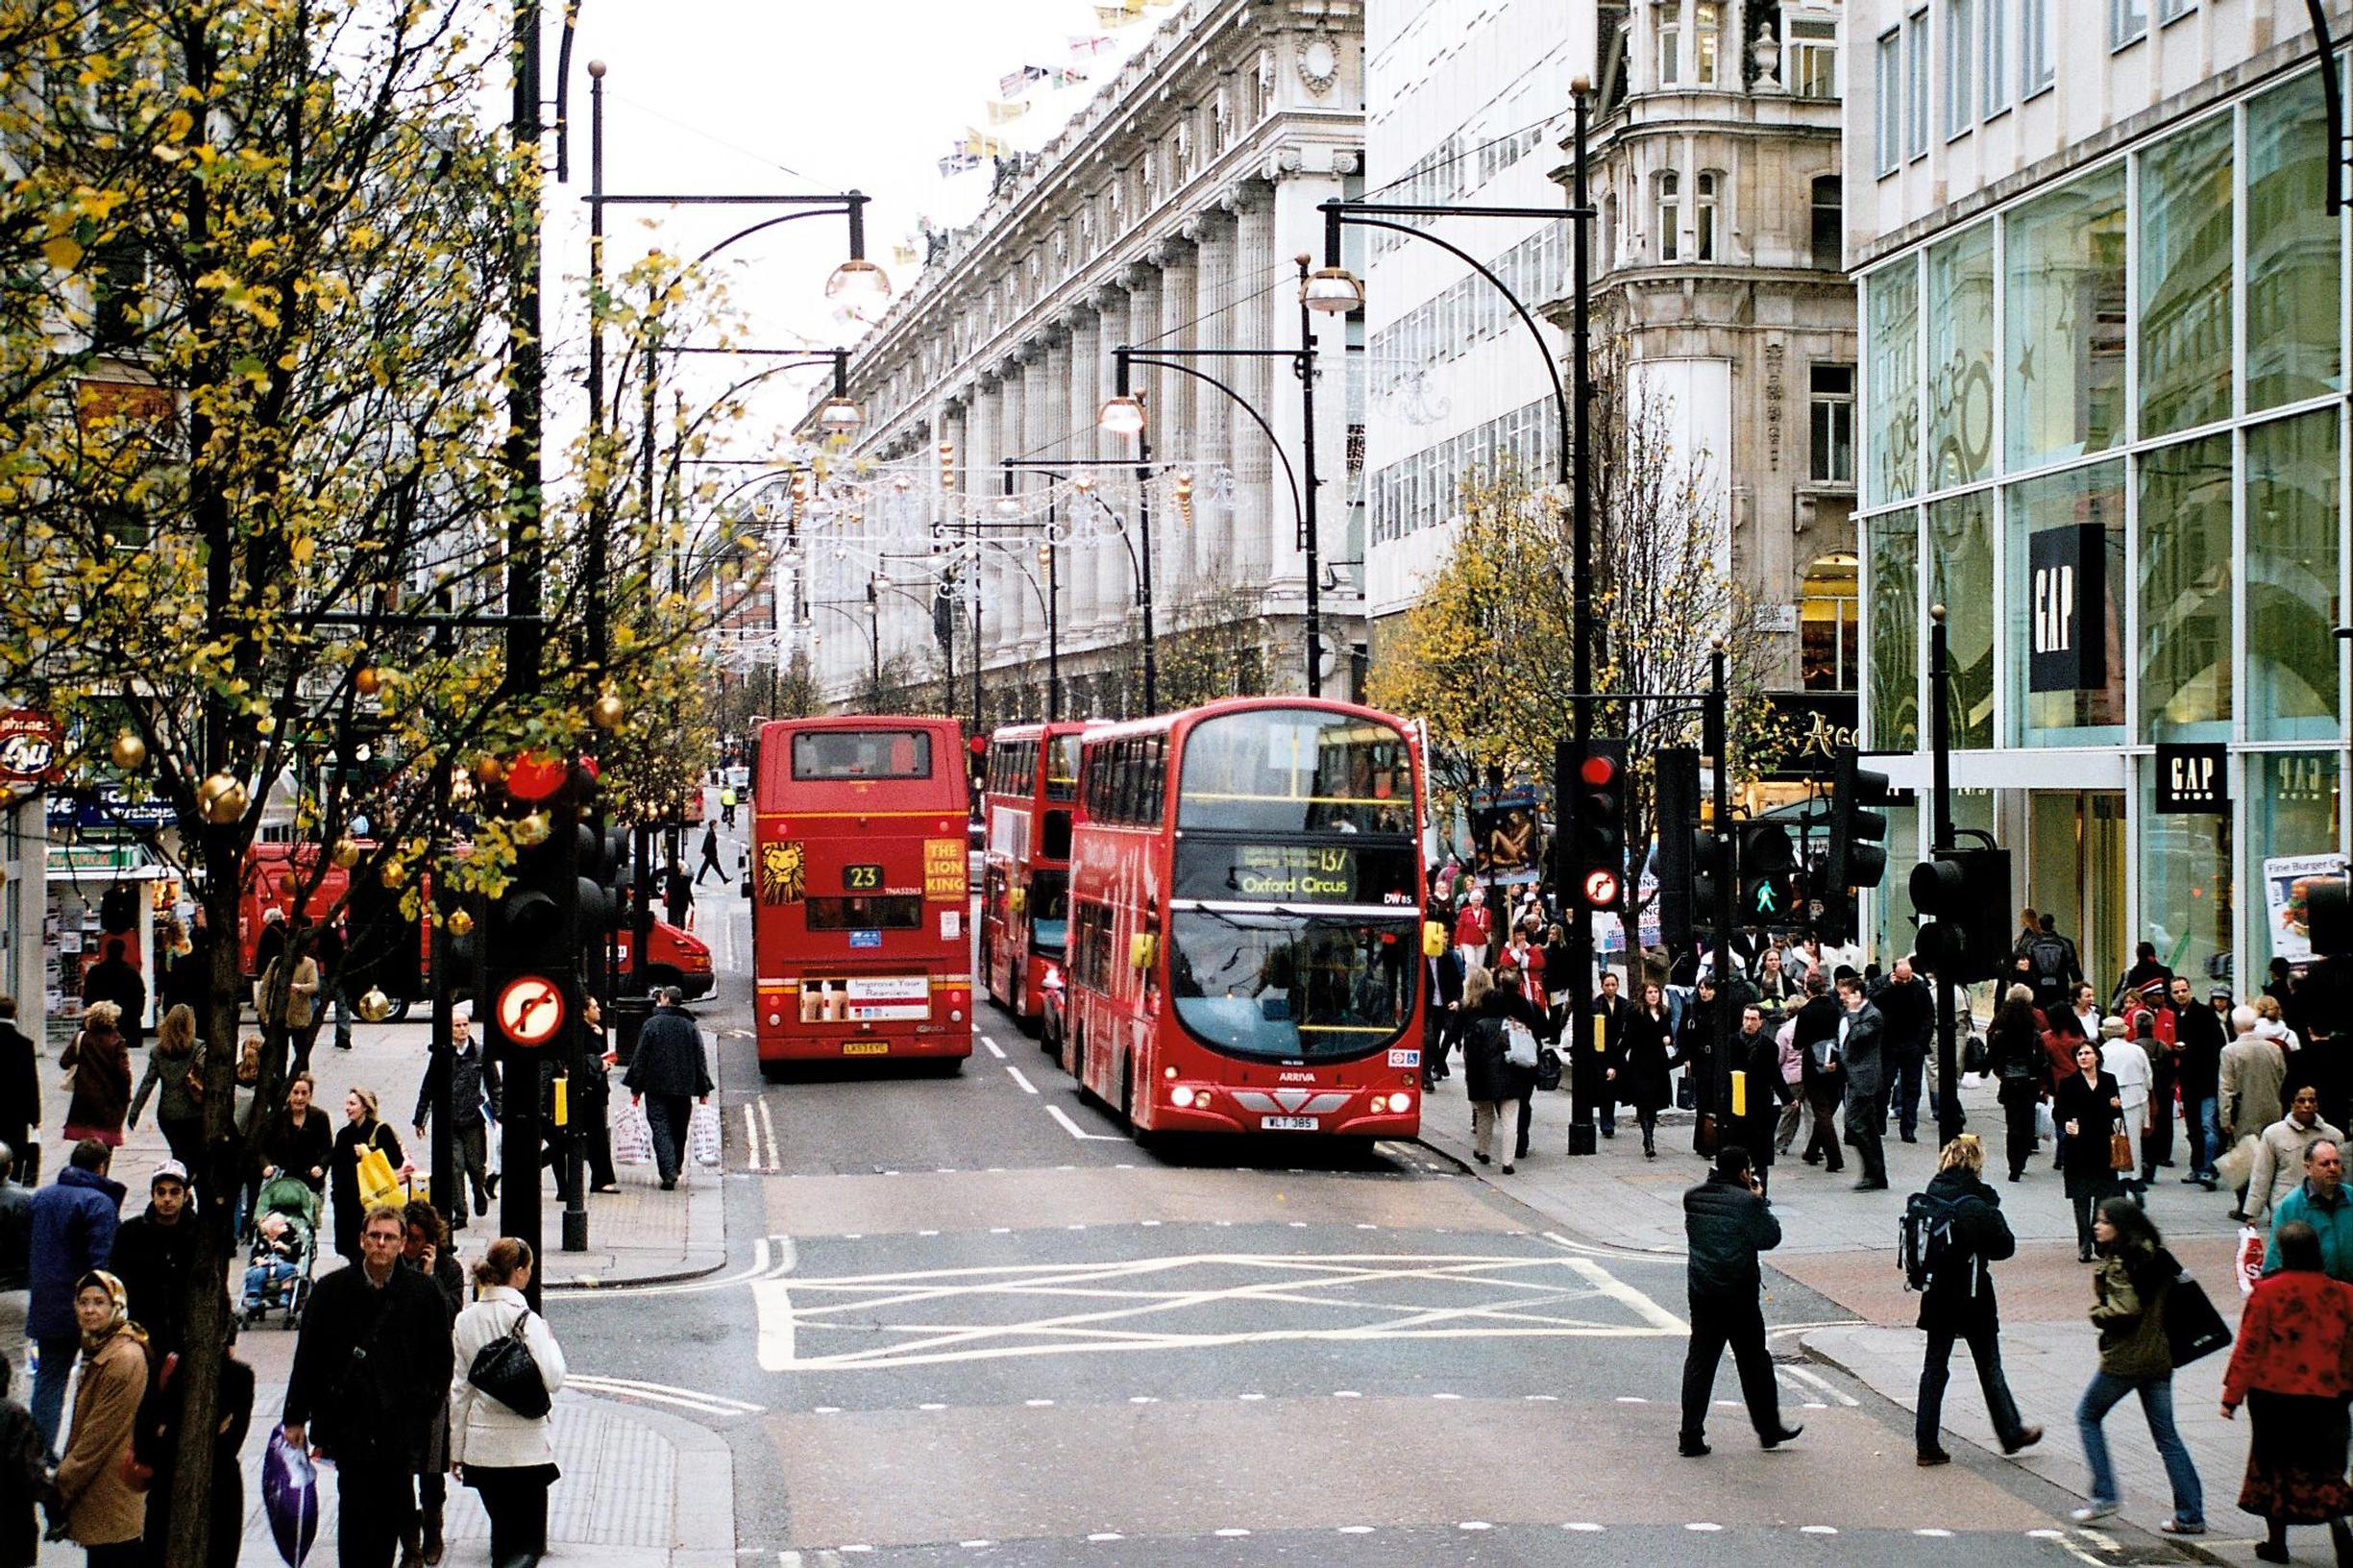 Oxford Street: fewer buses